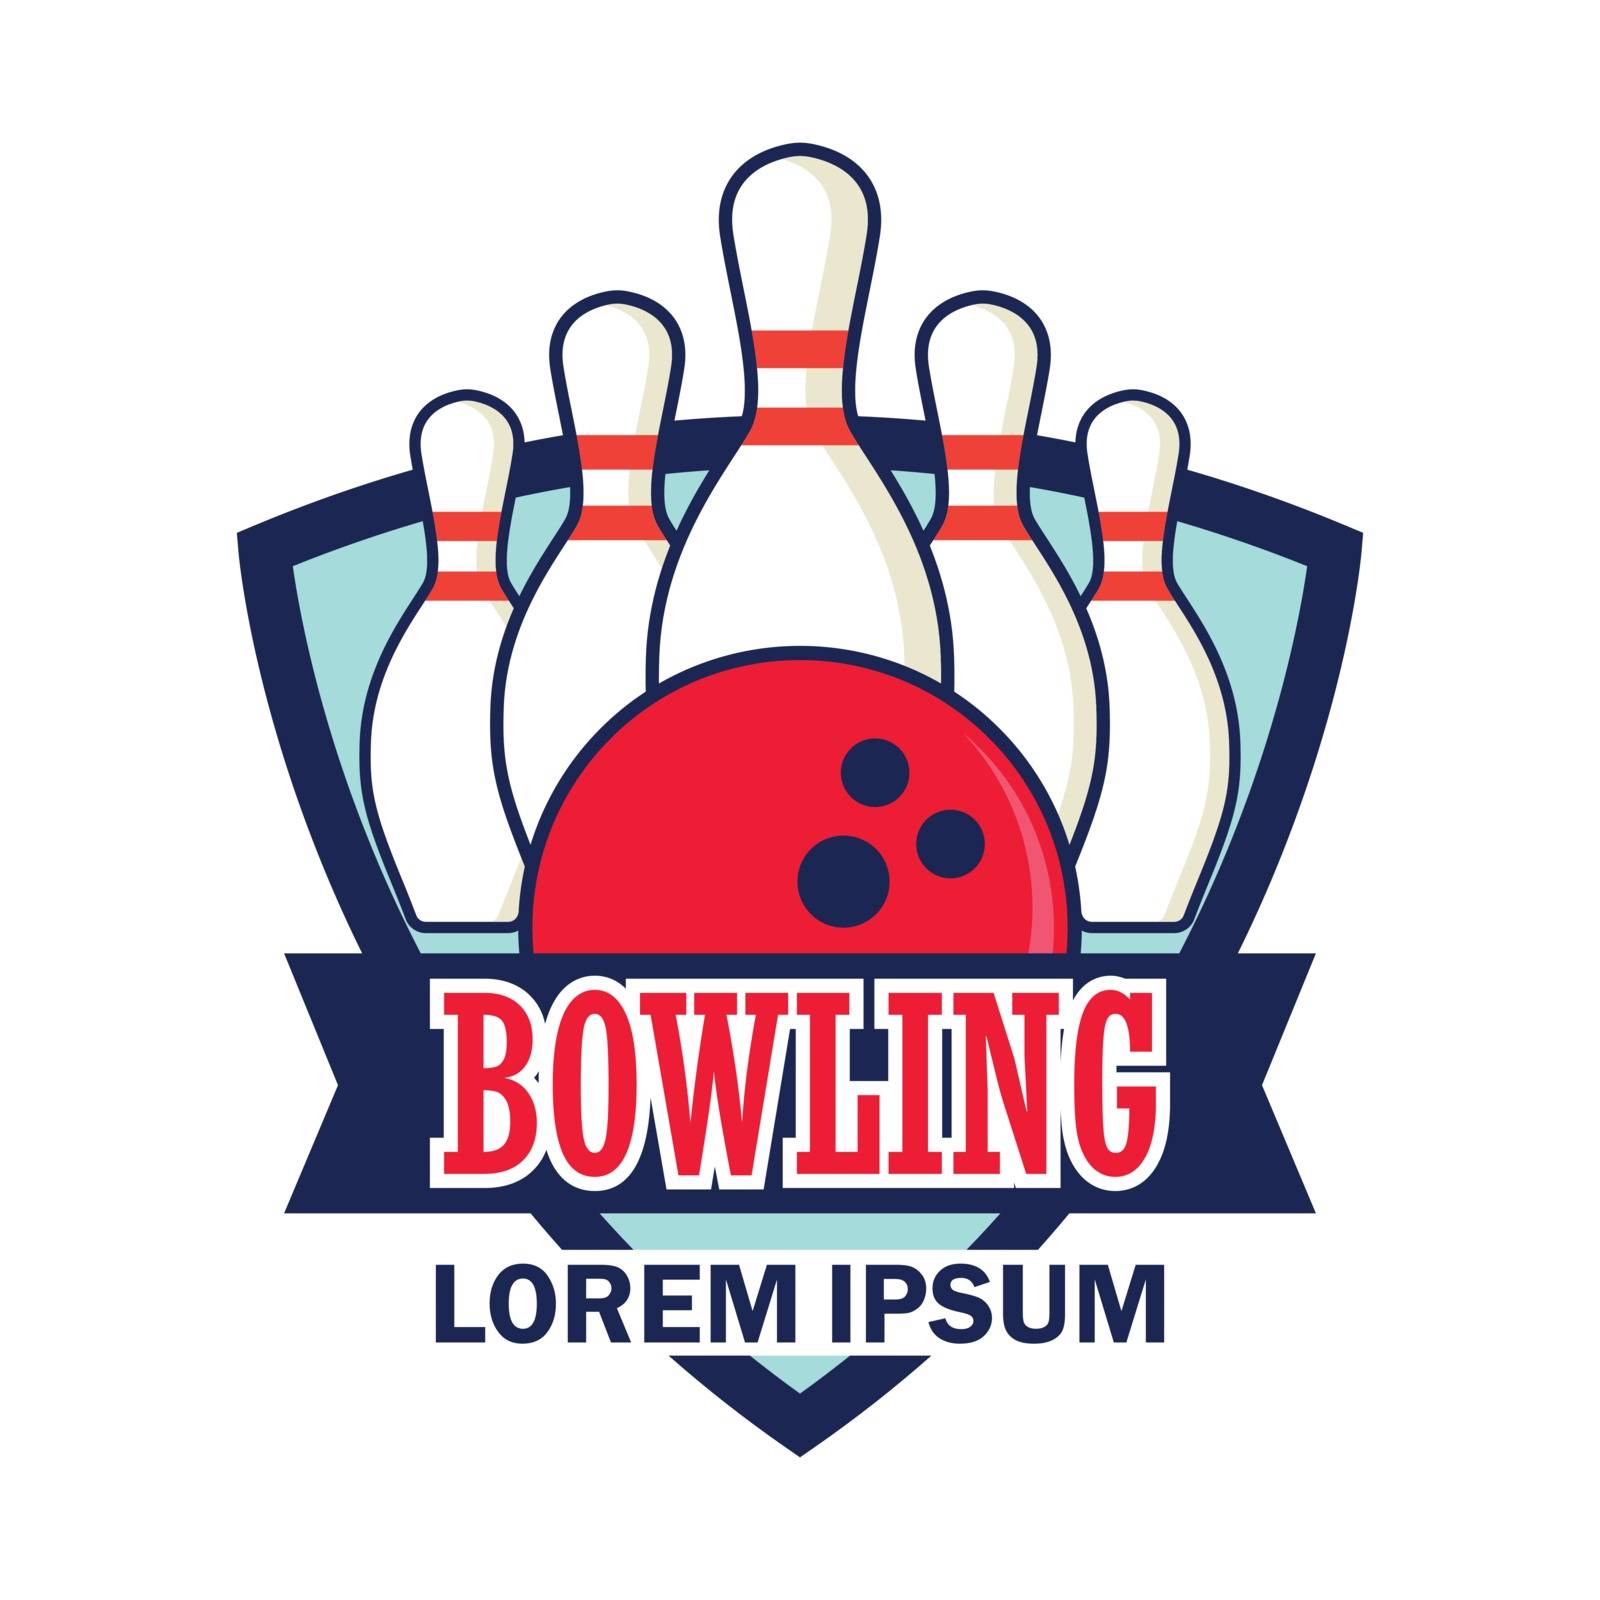 bowling icon with text space for your slogan / tag line, vector illustration